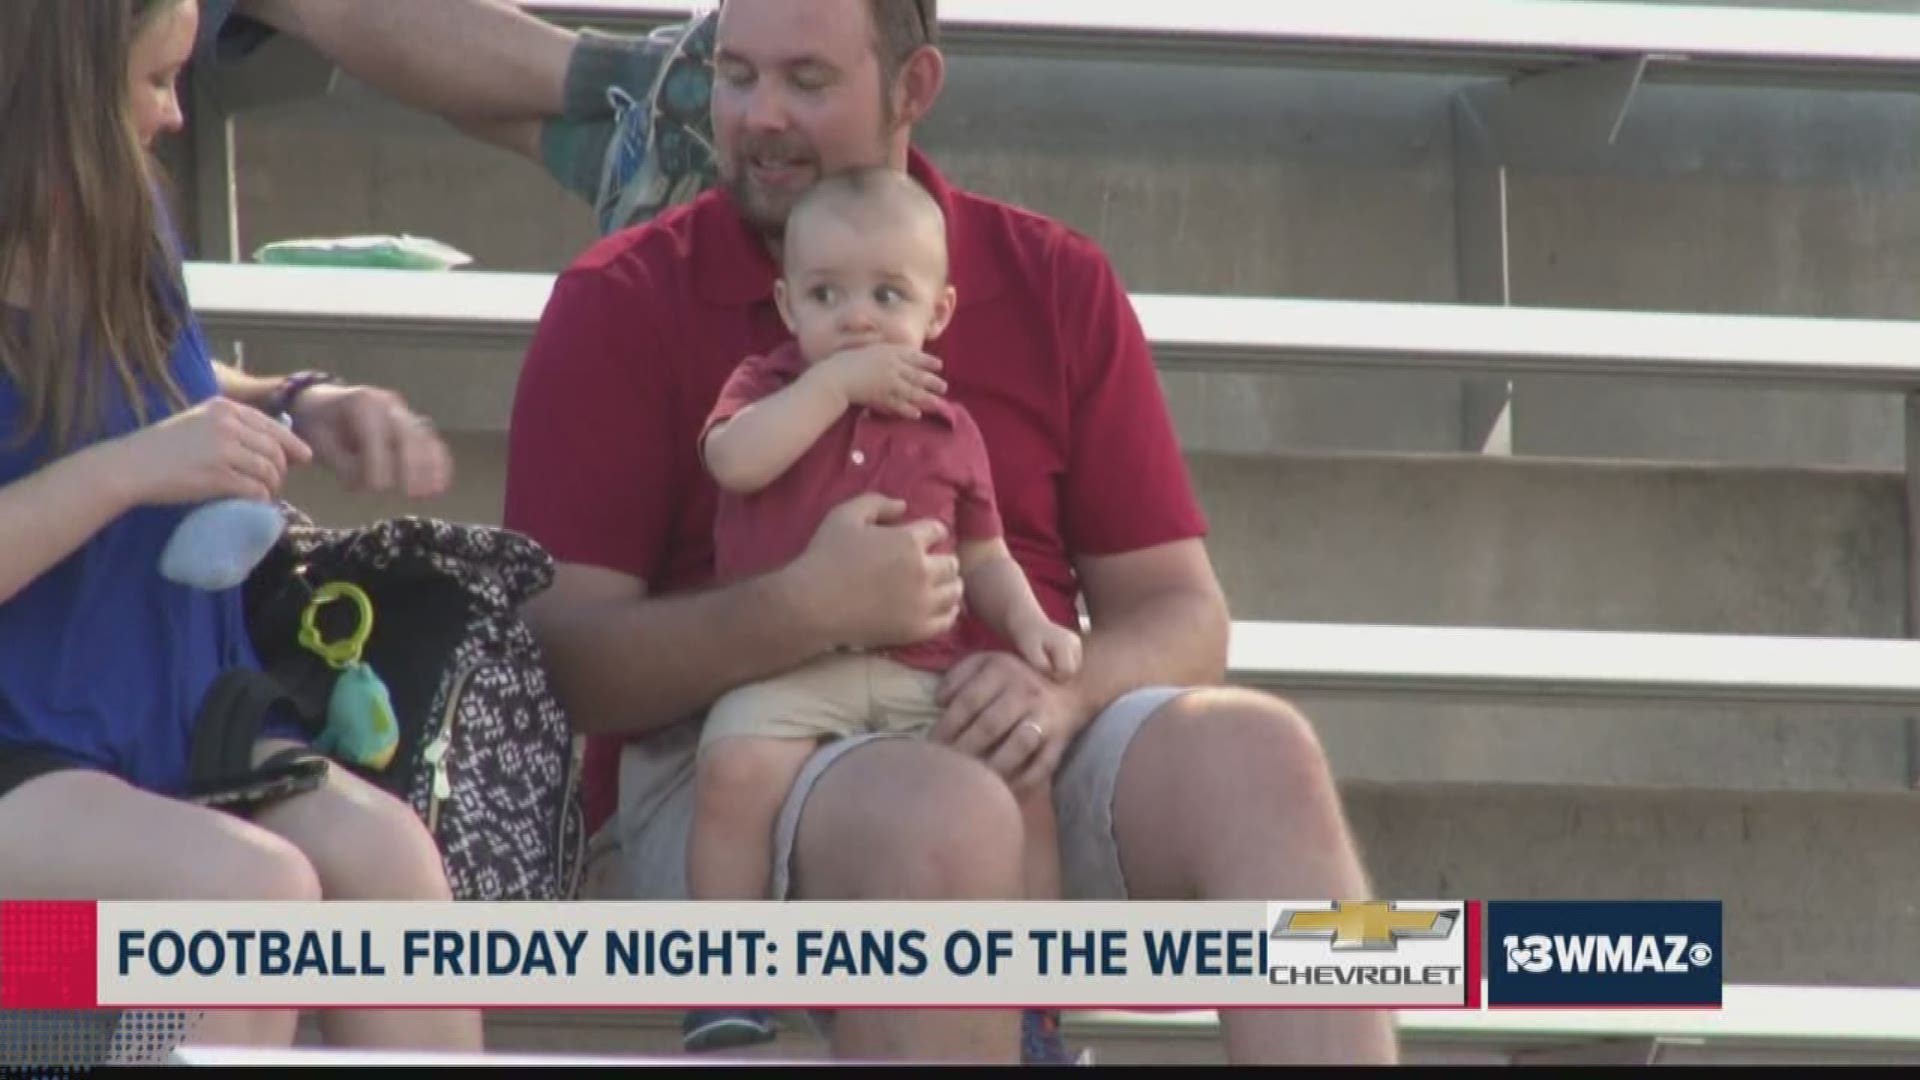 Here are your highlights from Football Friday Night.